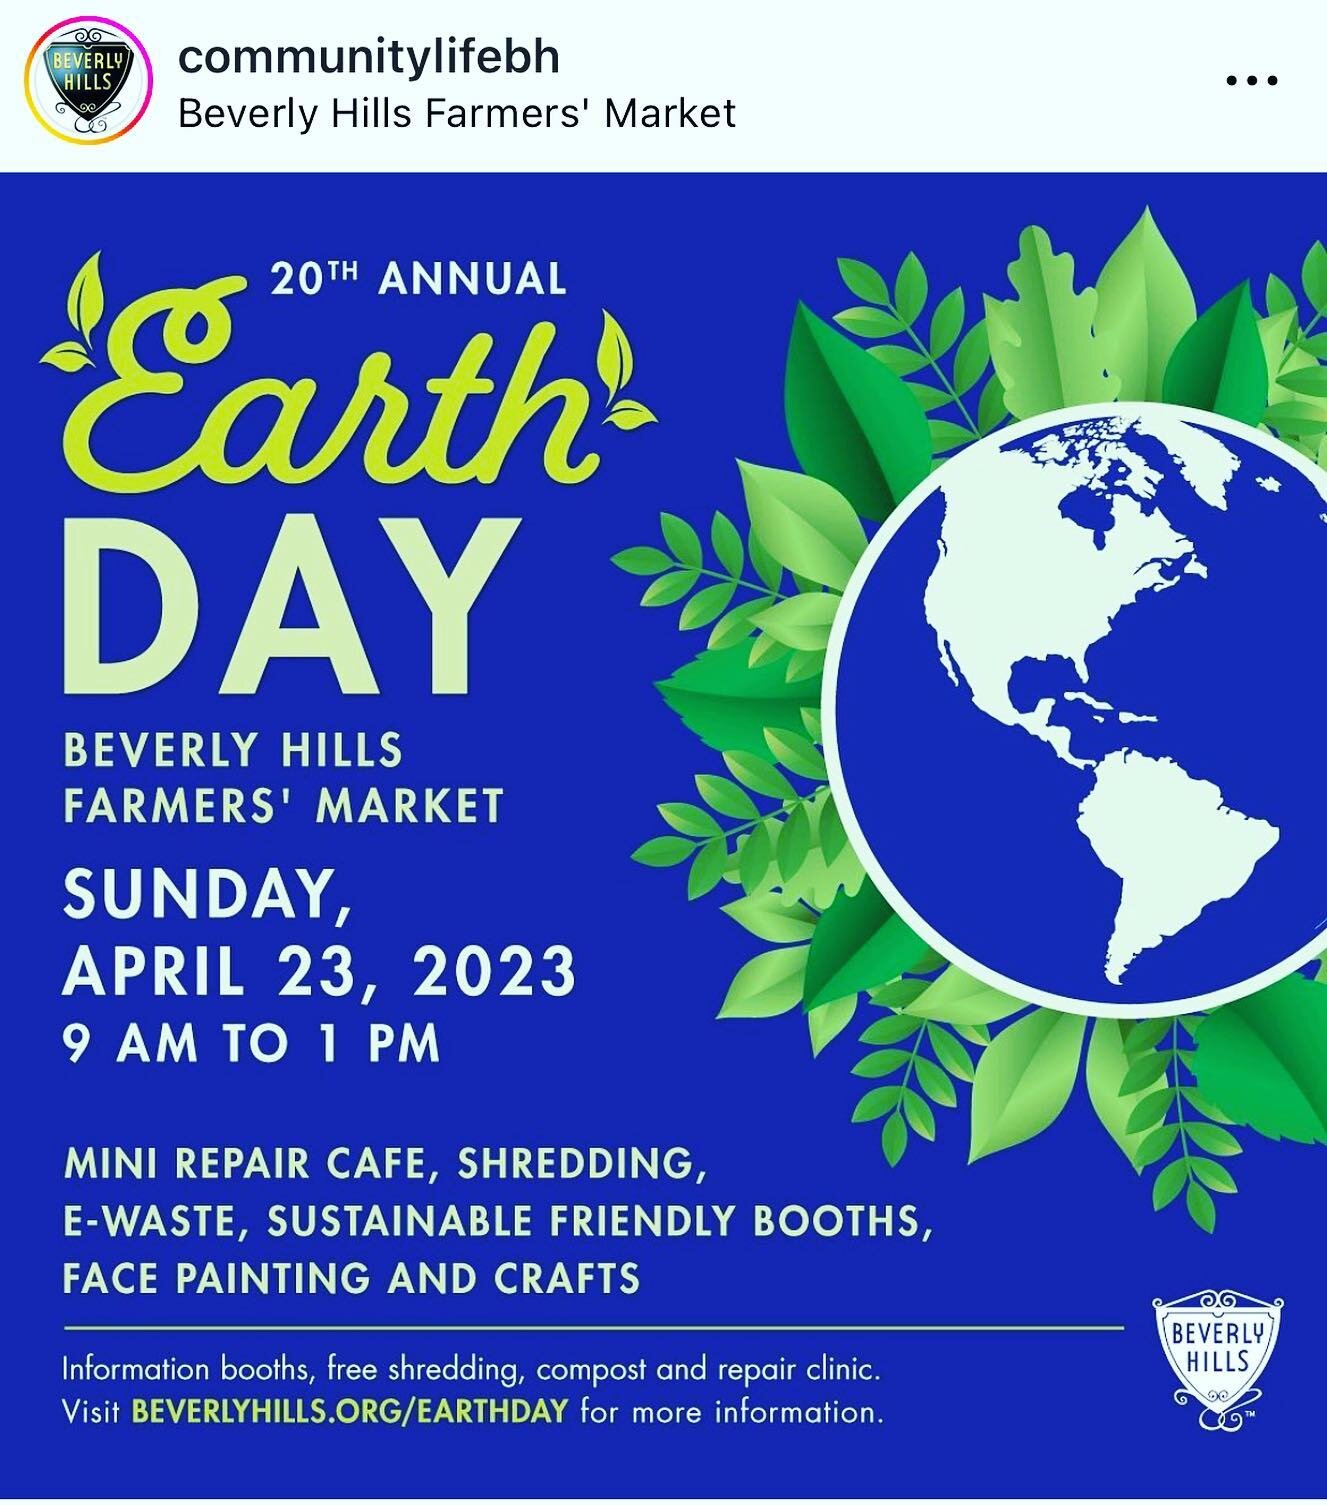 Come visit us tomorrow at the Beverly Hills Farmer&rsquo;s Market Earth Day celebration. We will have produce to sample, seeds to plant and will teach you how to make a reusable bag out of an old t shirt! #citygreens #community #urbanfarming #educati